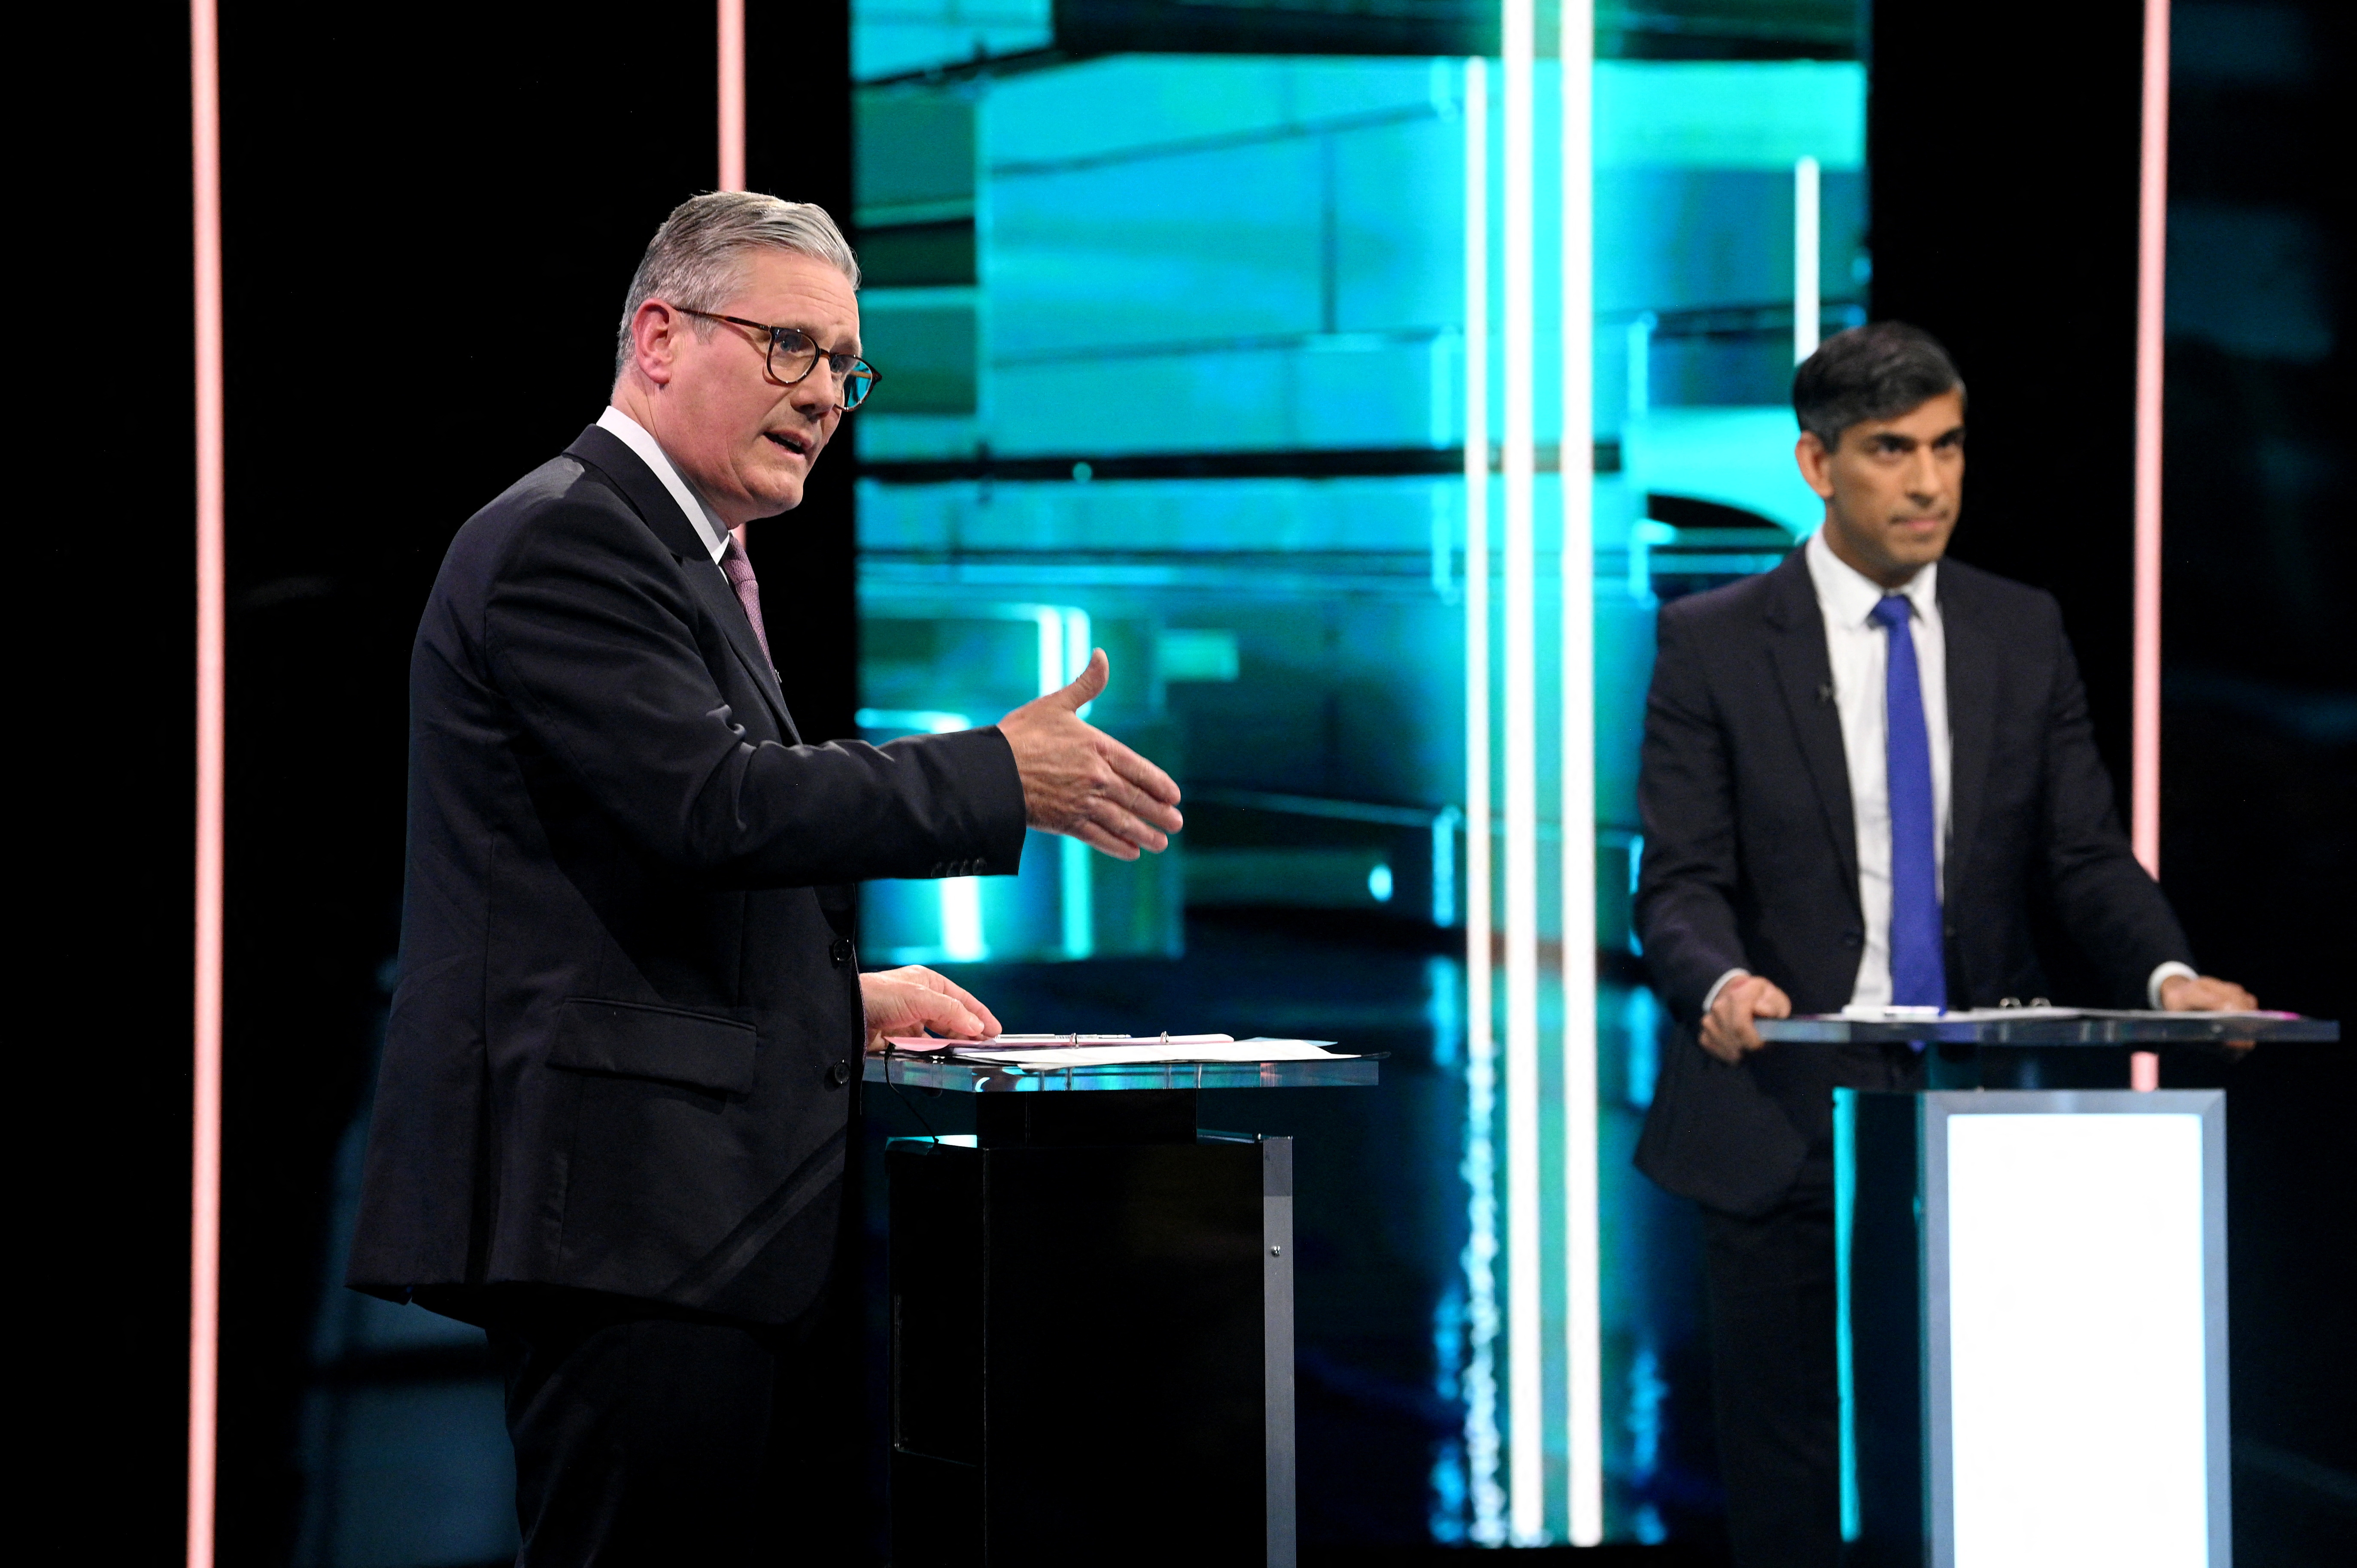 Labour Party leader Keir Starmer and Prime Minister and Conservative Party leader Rishi Sunak debate, in Manchester